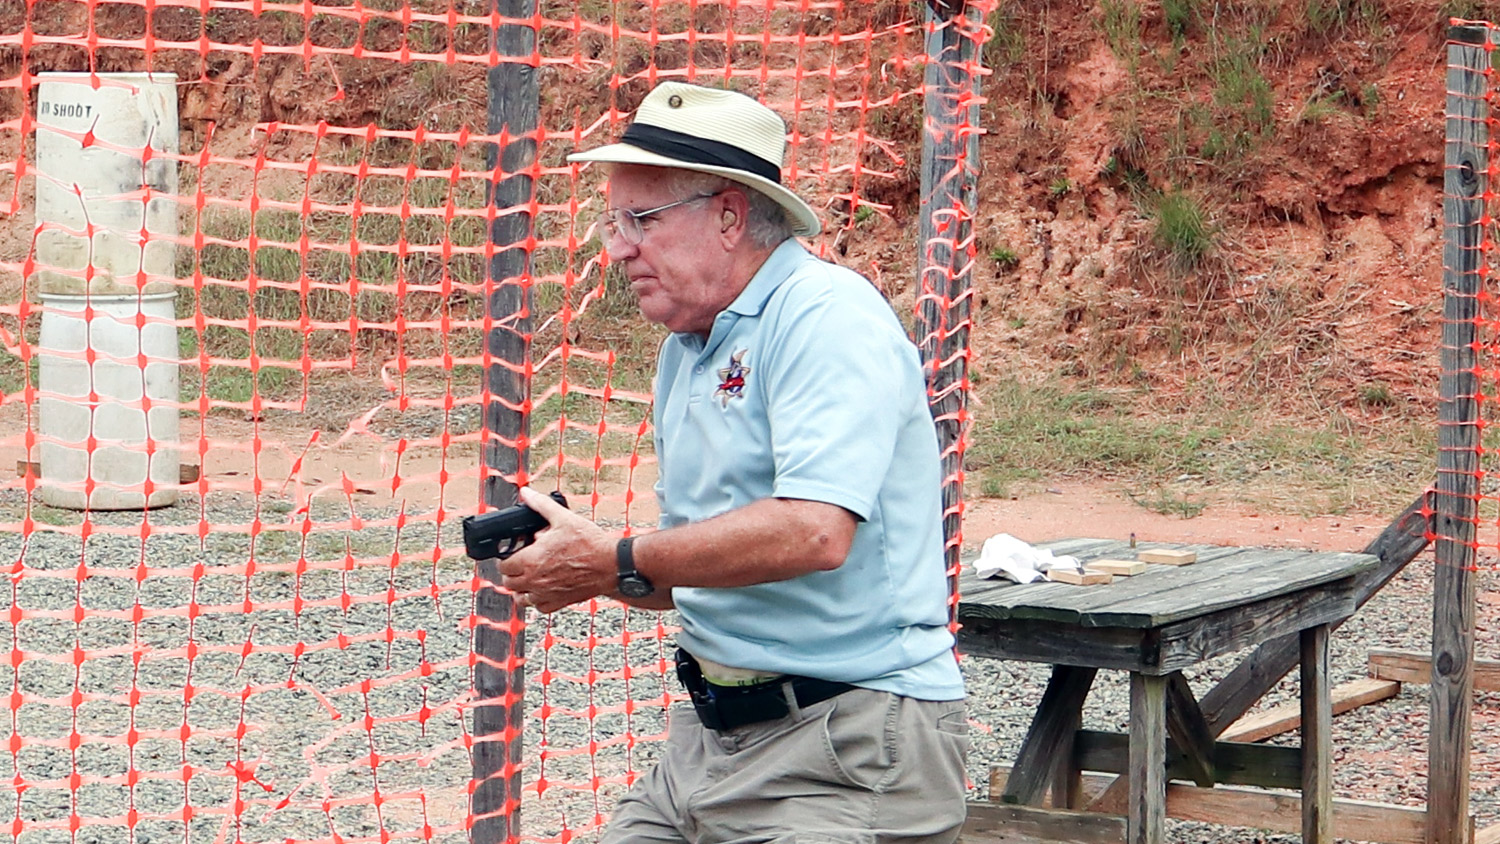 Dick Jones at a defensive pistol match with the Springfield Hellcat